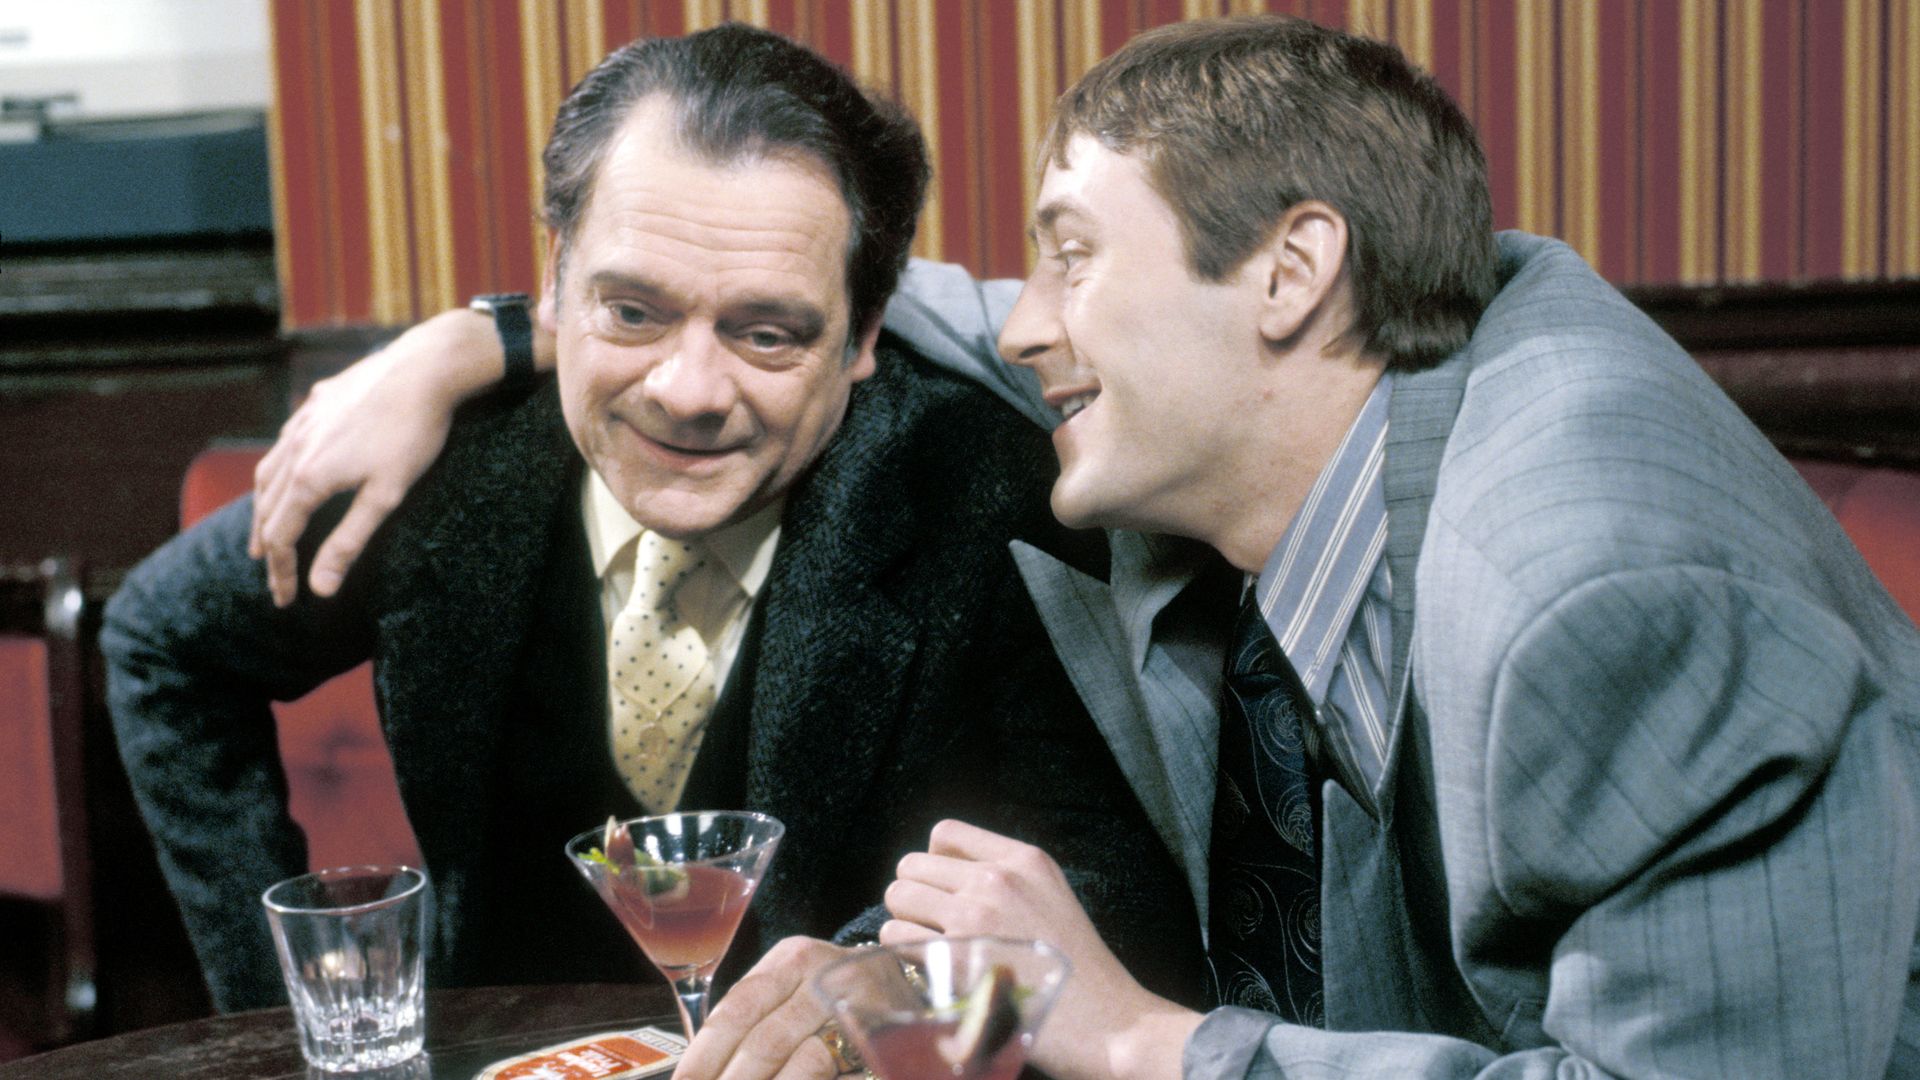 Famous Del Boy insult 'at risk of dying out'